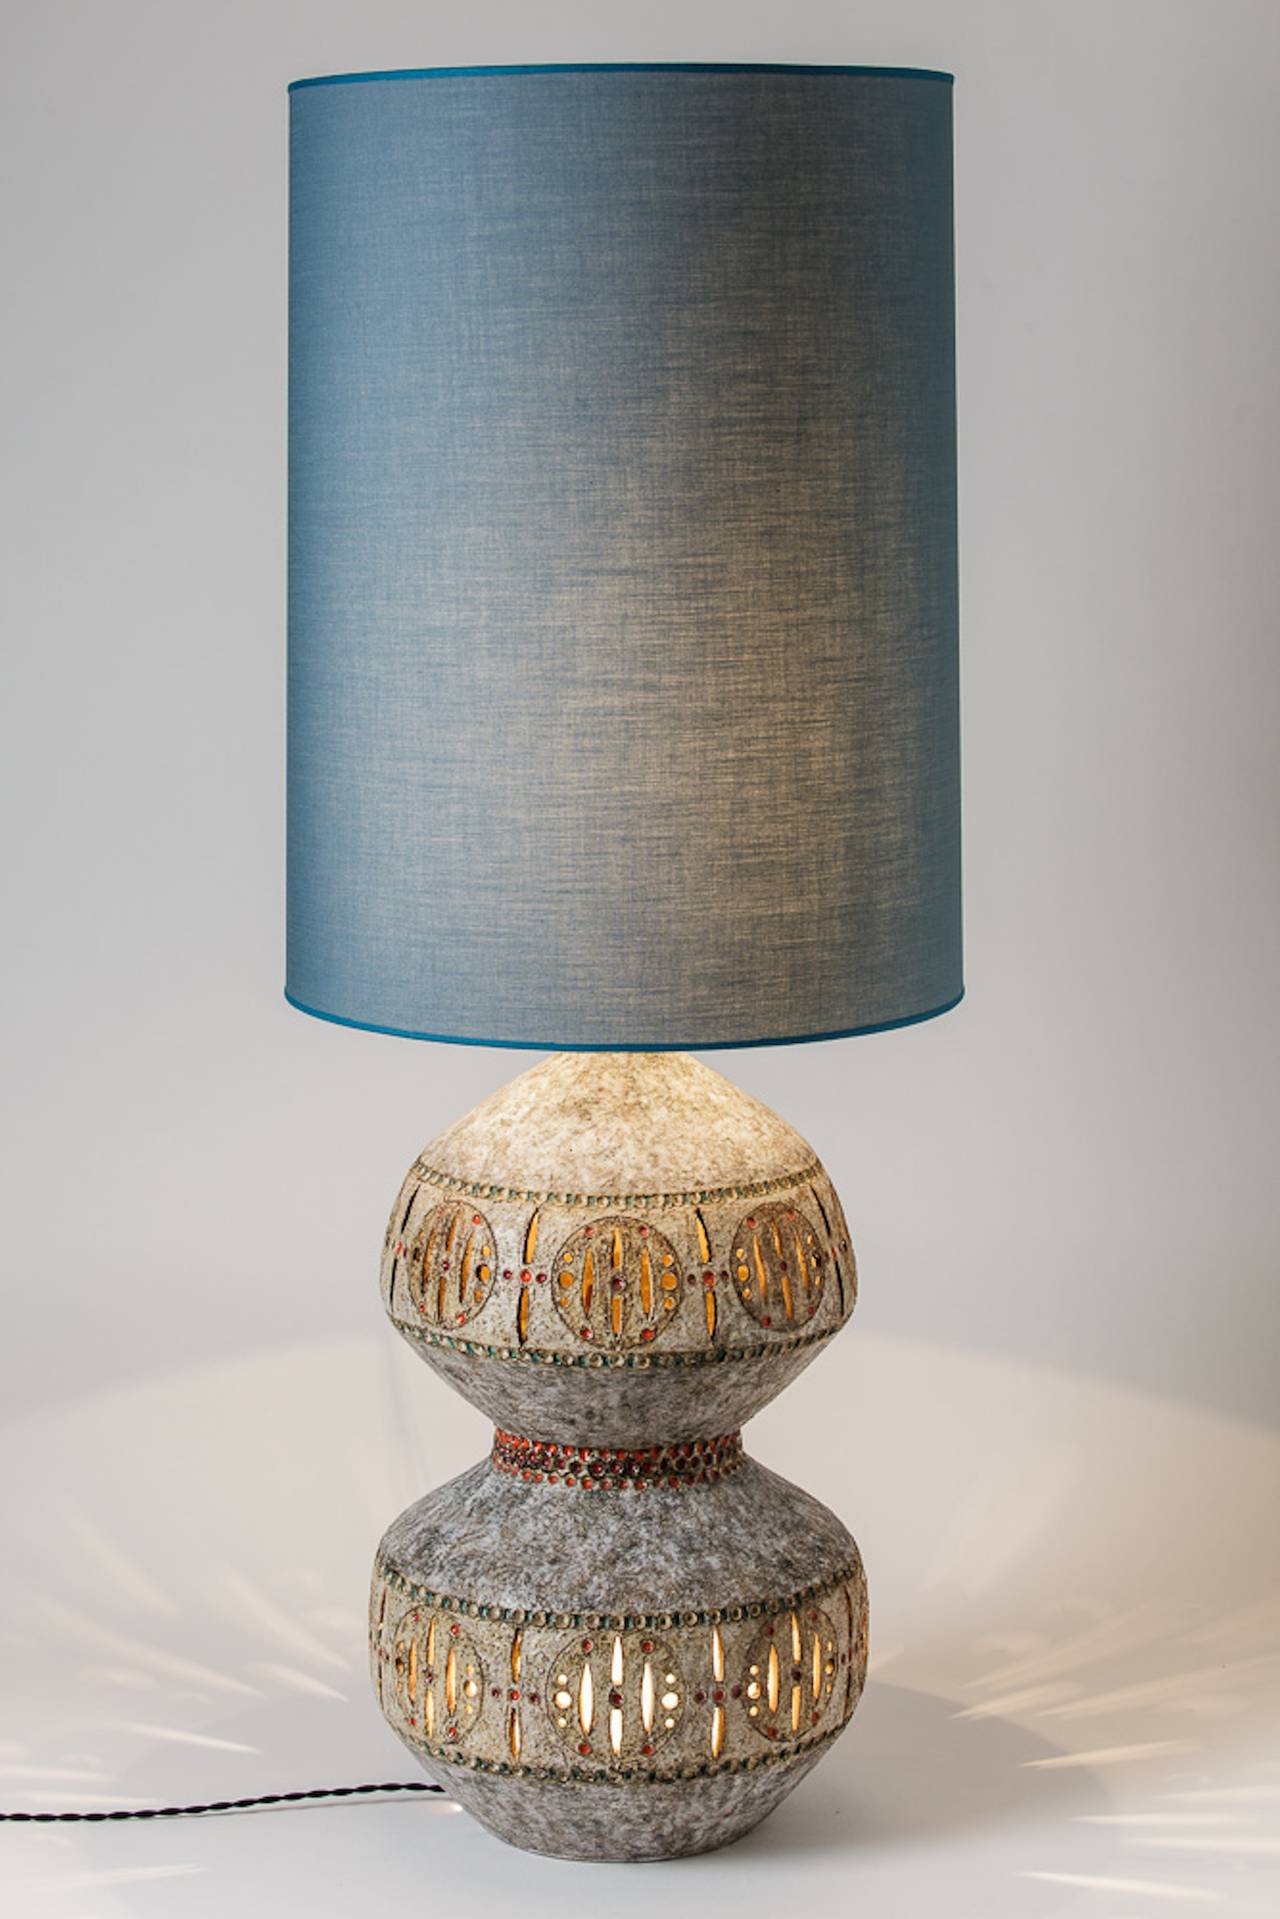 French Extraordinary and Important Ceramic Lamp by Raphaël Giarrusso, Vallauris